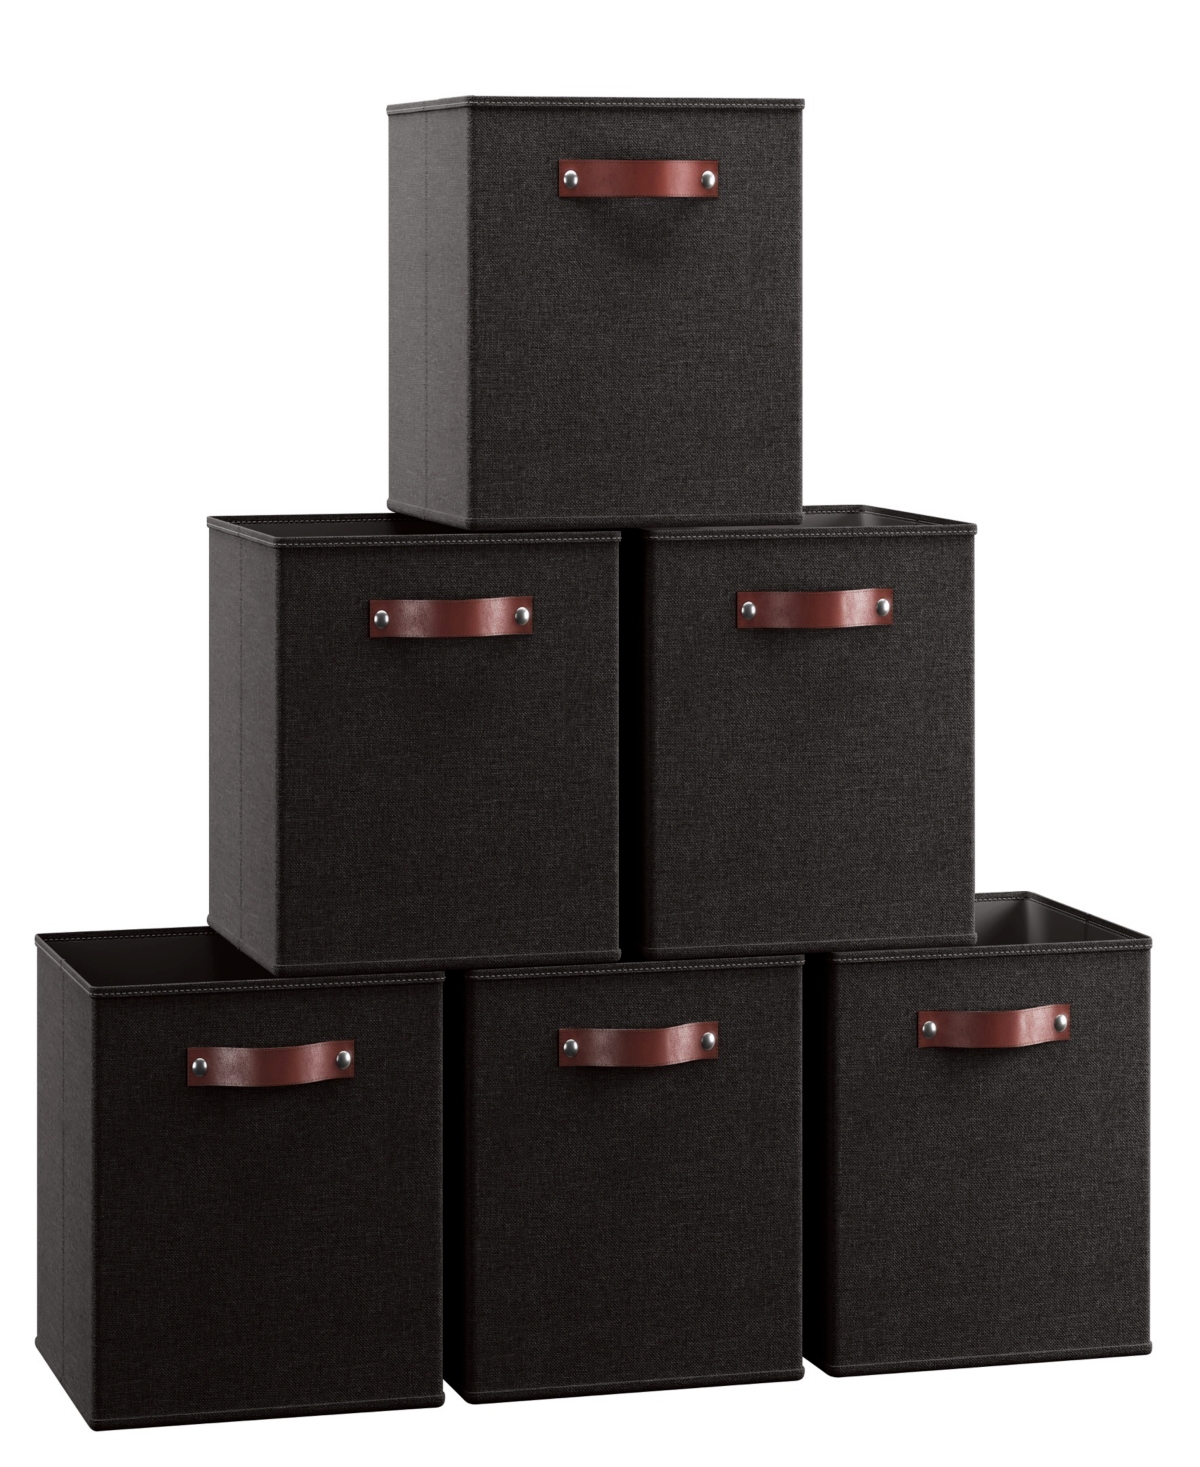 Ornavo Home Foldable Linen Storage Cube Bin With Leather Handles In Black